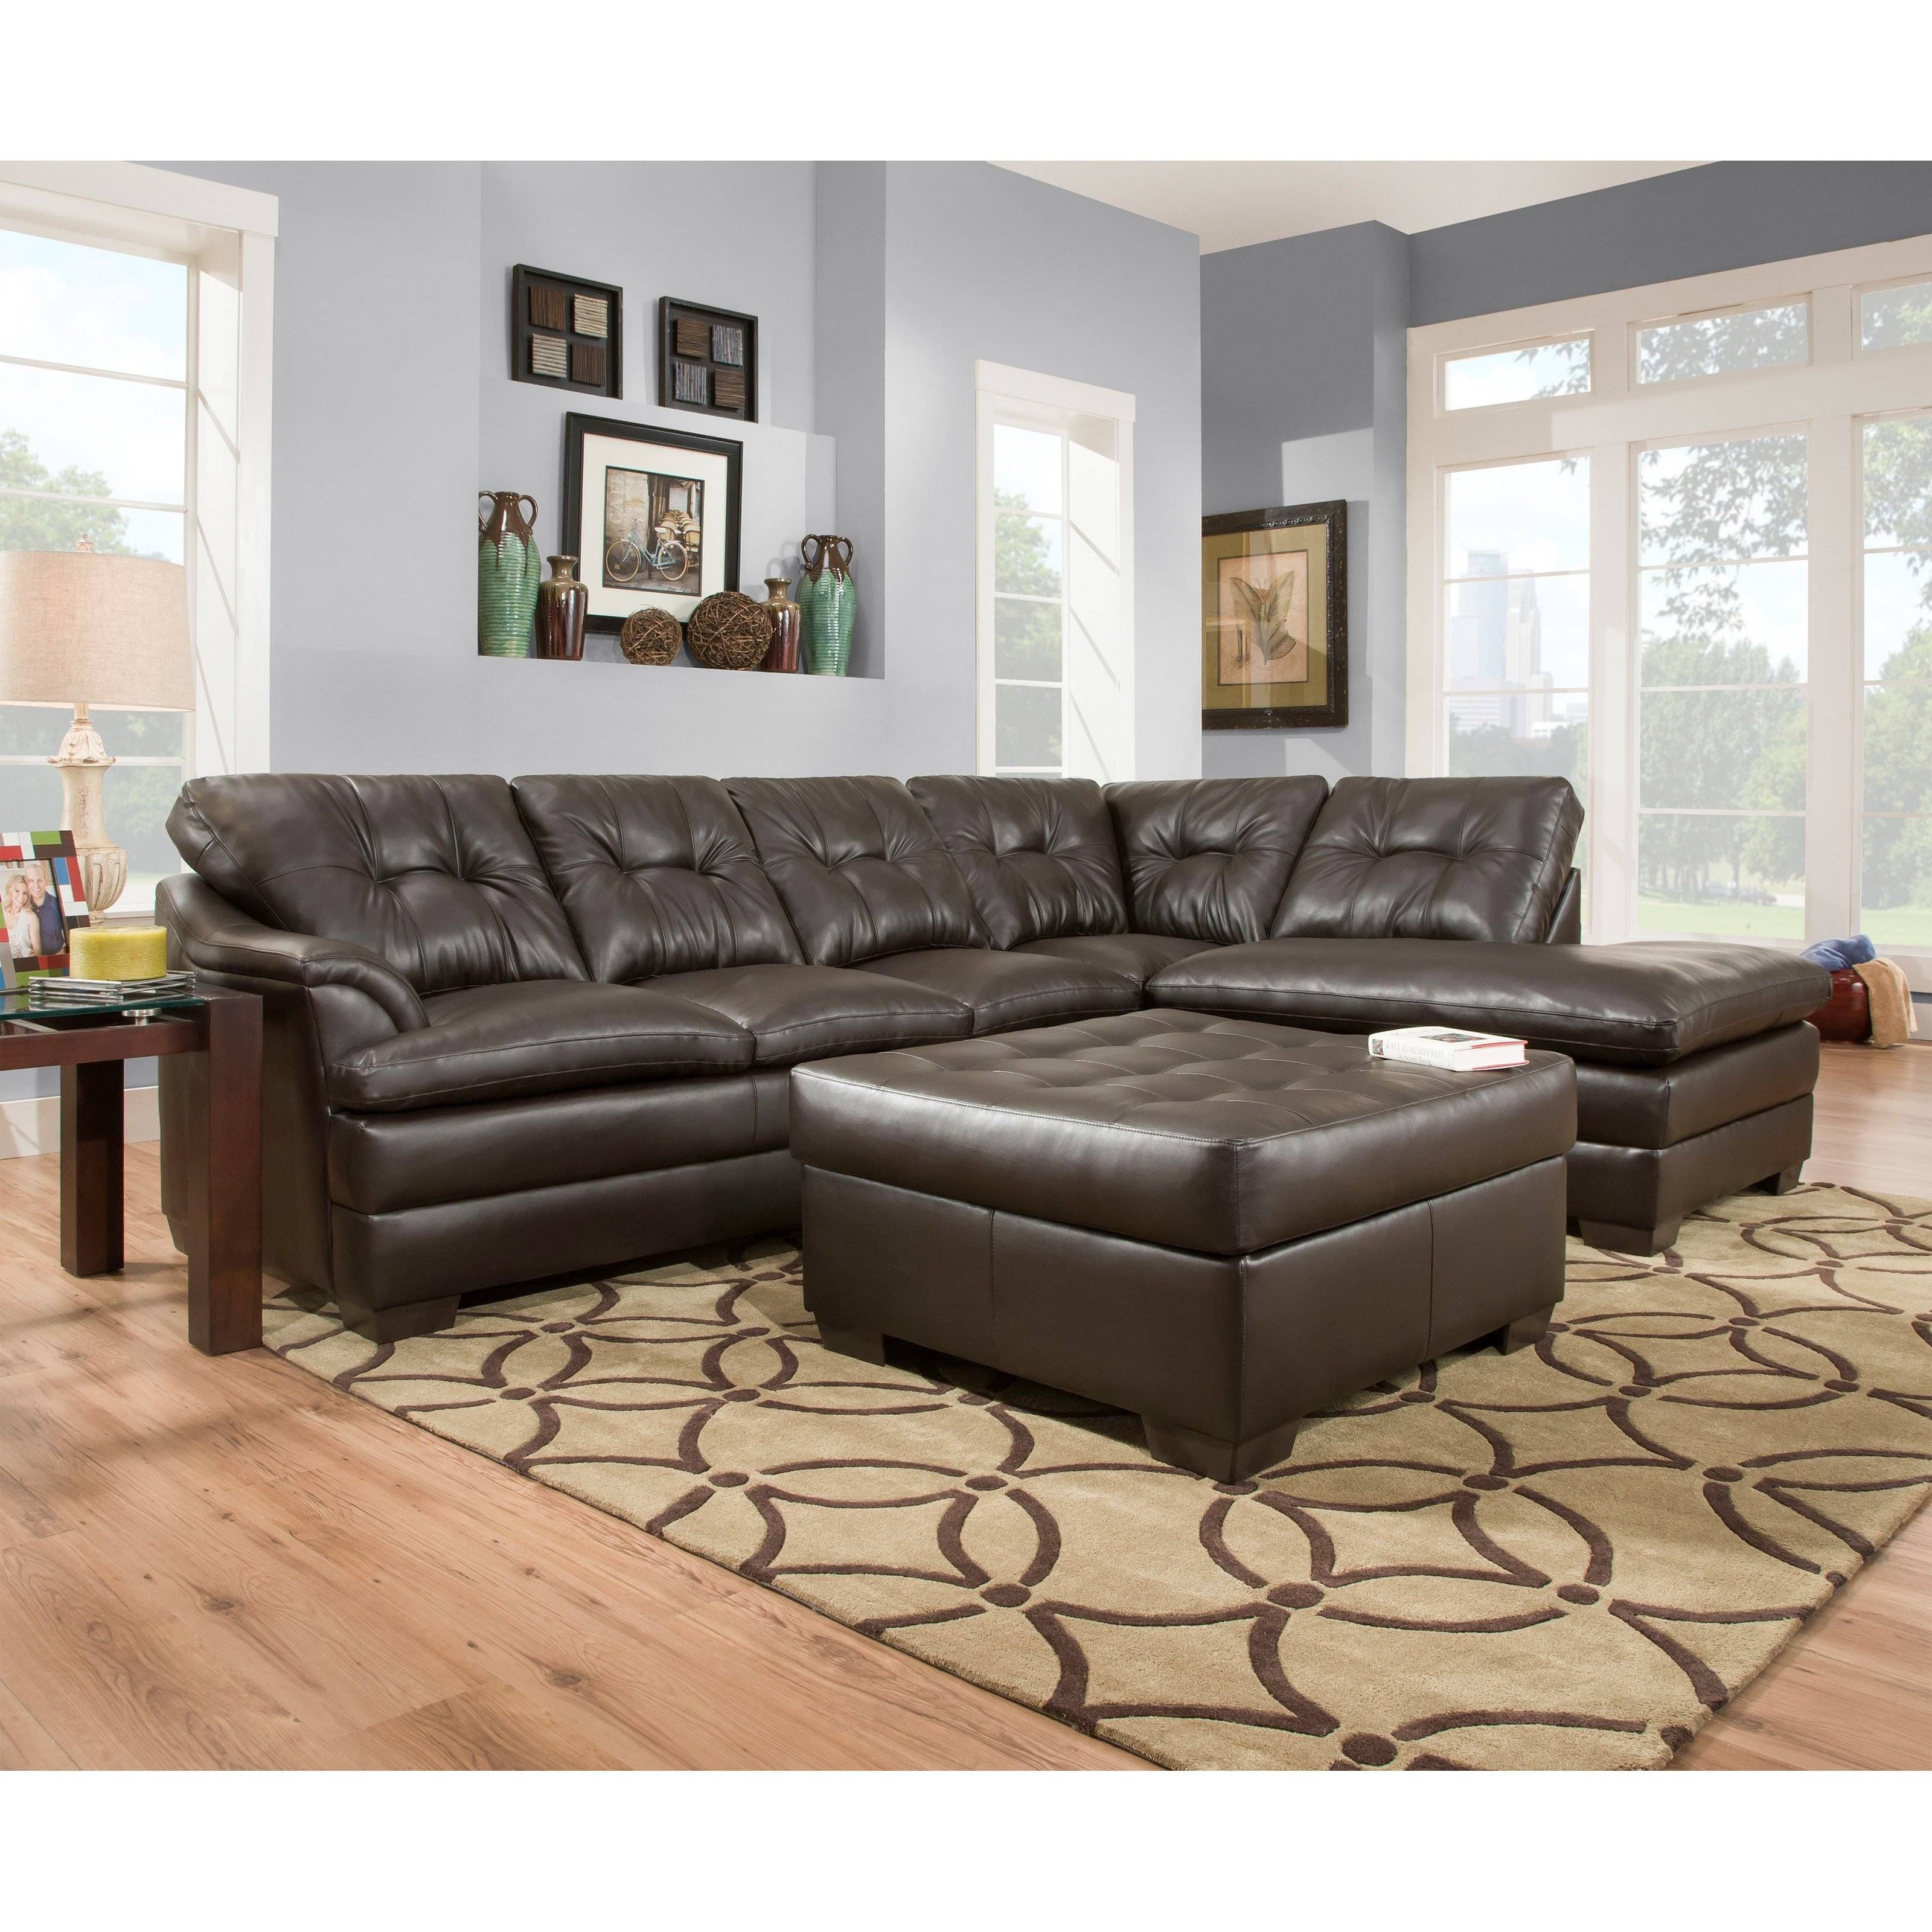 Simmons Upholstery Apollo Sectional With Optional Ottoman | Hayneedle With Simmons Sectional Sofas (View 7 of 30)